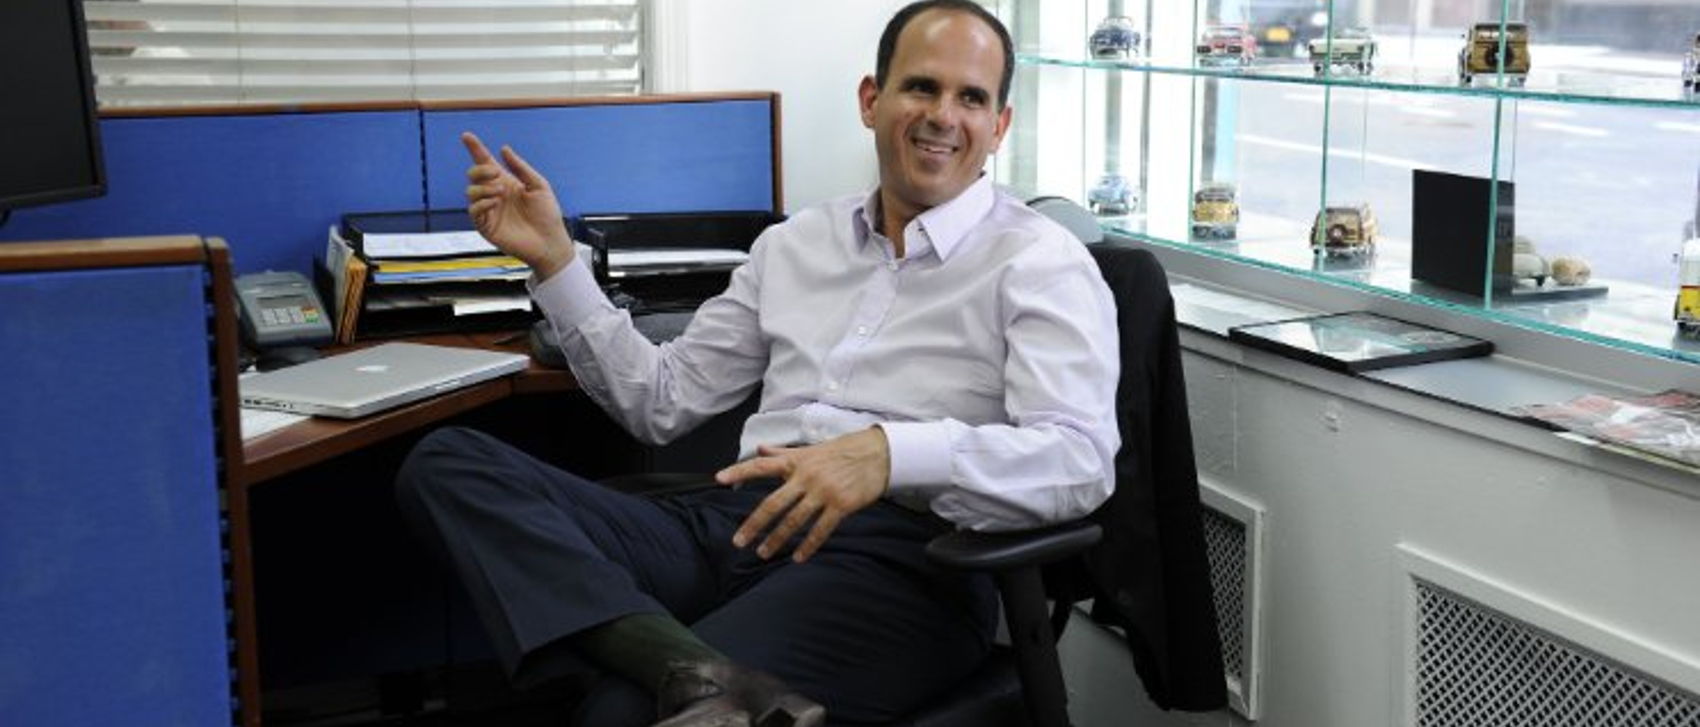 Why I'm Copying Every Move from Marcus Lemonis